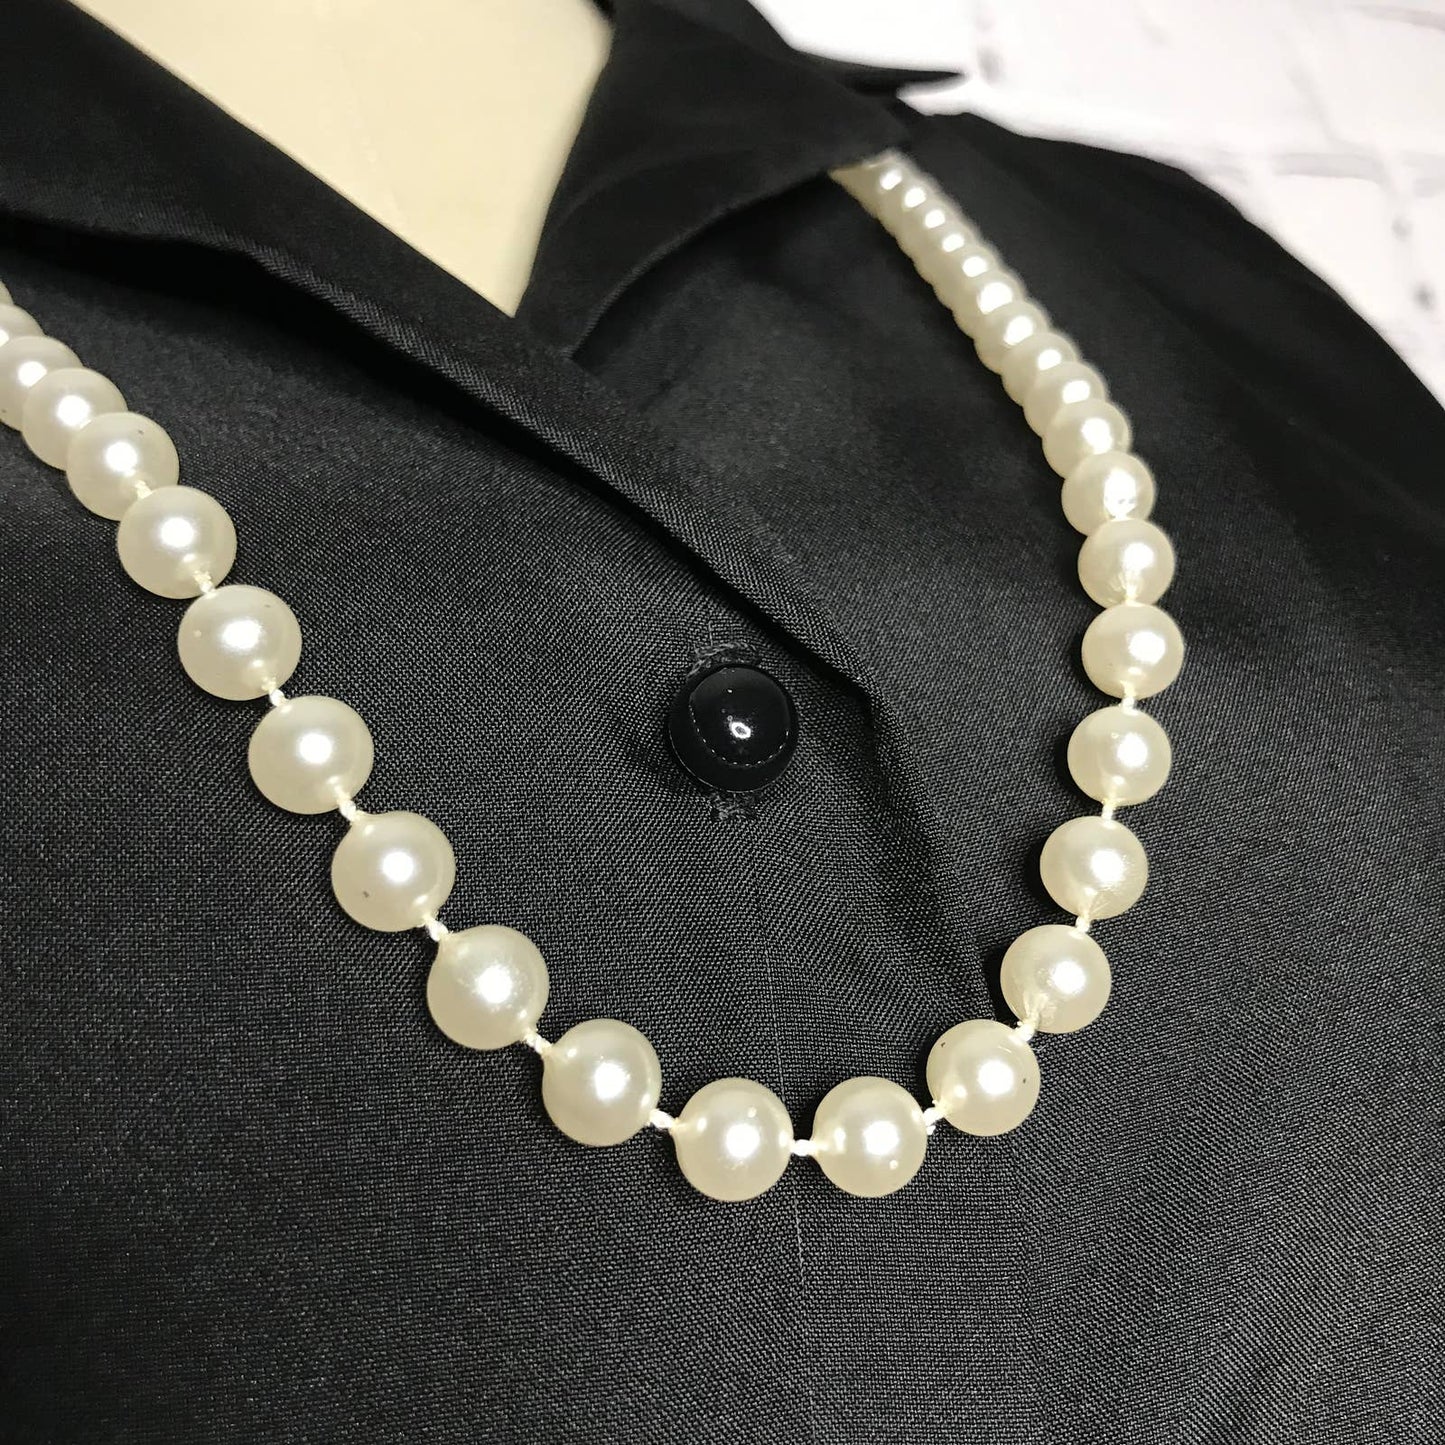 Vintage 80s Black Blouse with Attached Faux Pearl Necklace by Style Trix Size 40